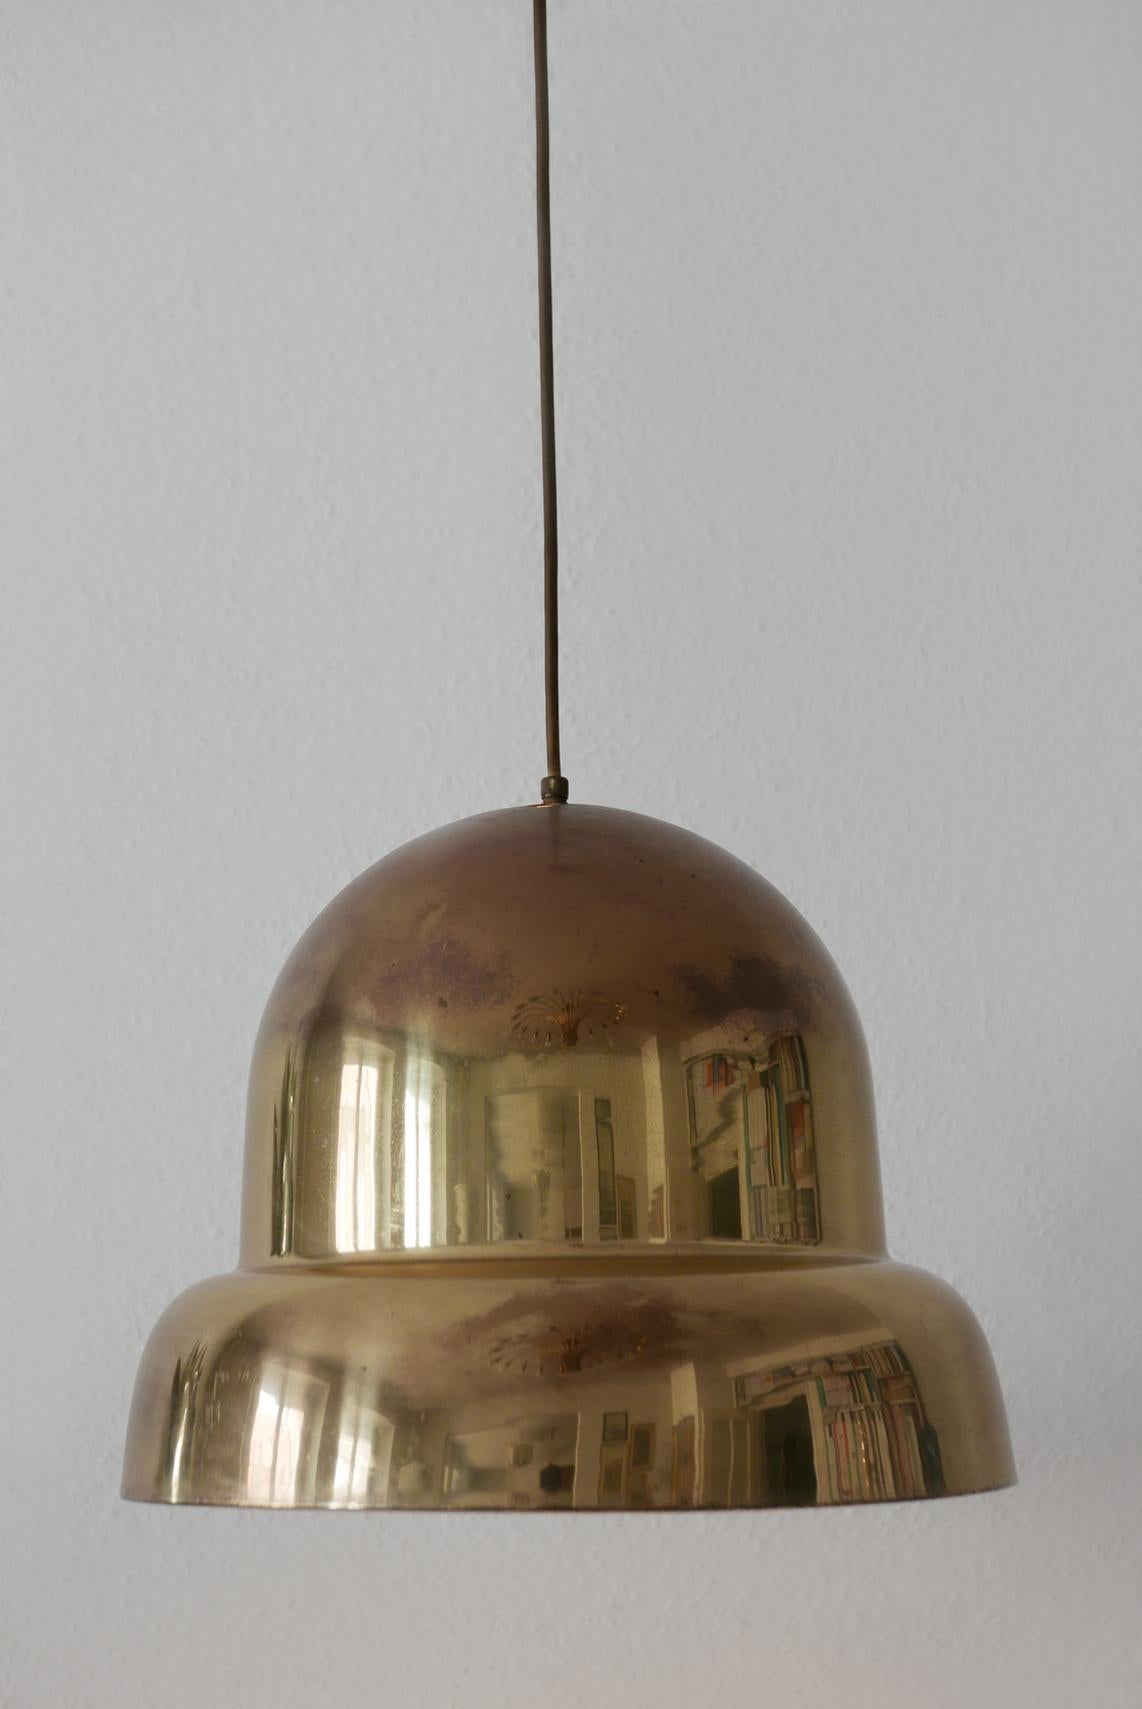 Rare and large Mid-Century Modern pendant lamp or hanging light. Manufactured probably by Bergboms, Sweden, 1950s.

Executed in brass. It needs 1 x E27 Edison screw fit bulb. It runs both on 110 / 230 volt.

Dimensions:
H 12.59 in. x Dm 14.96 in. /